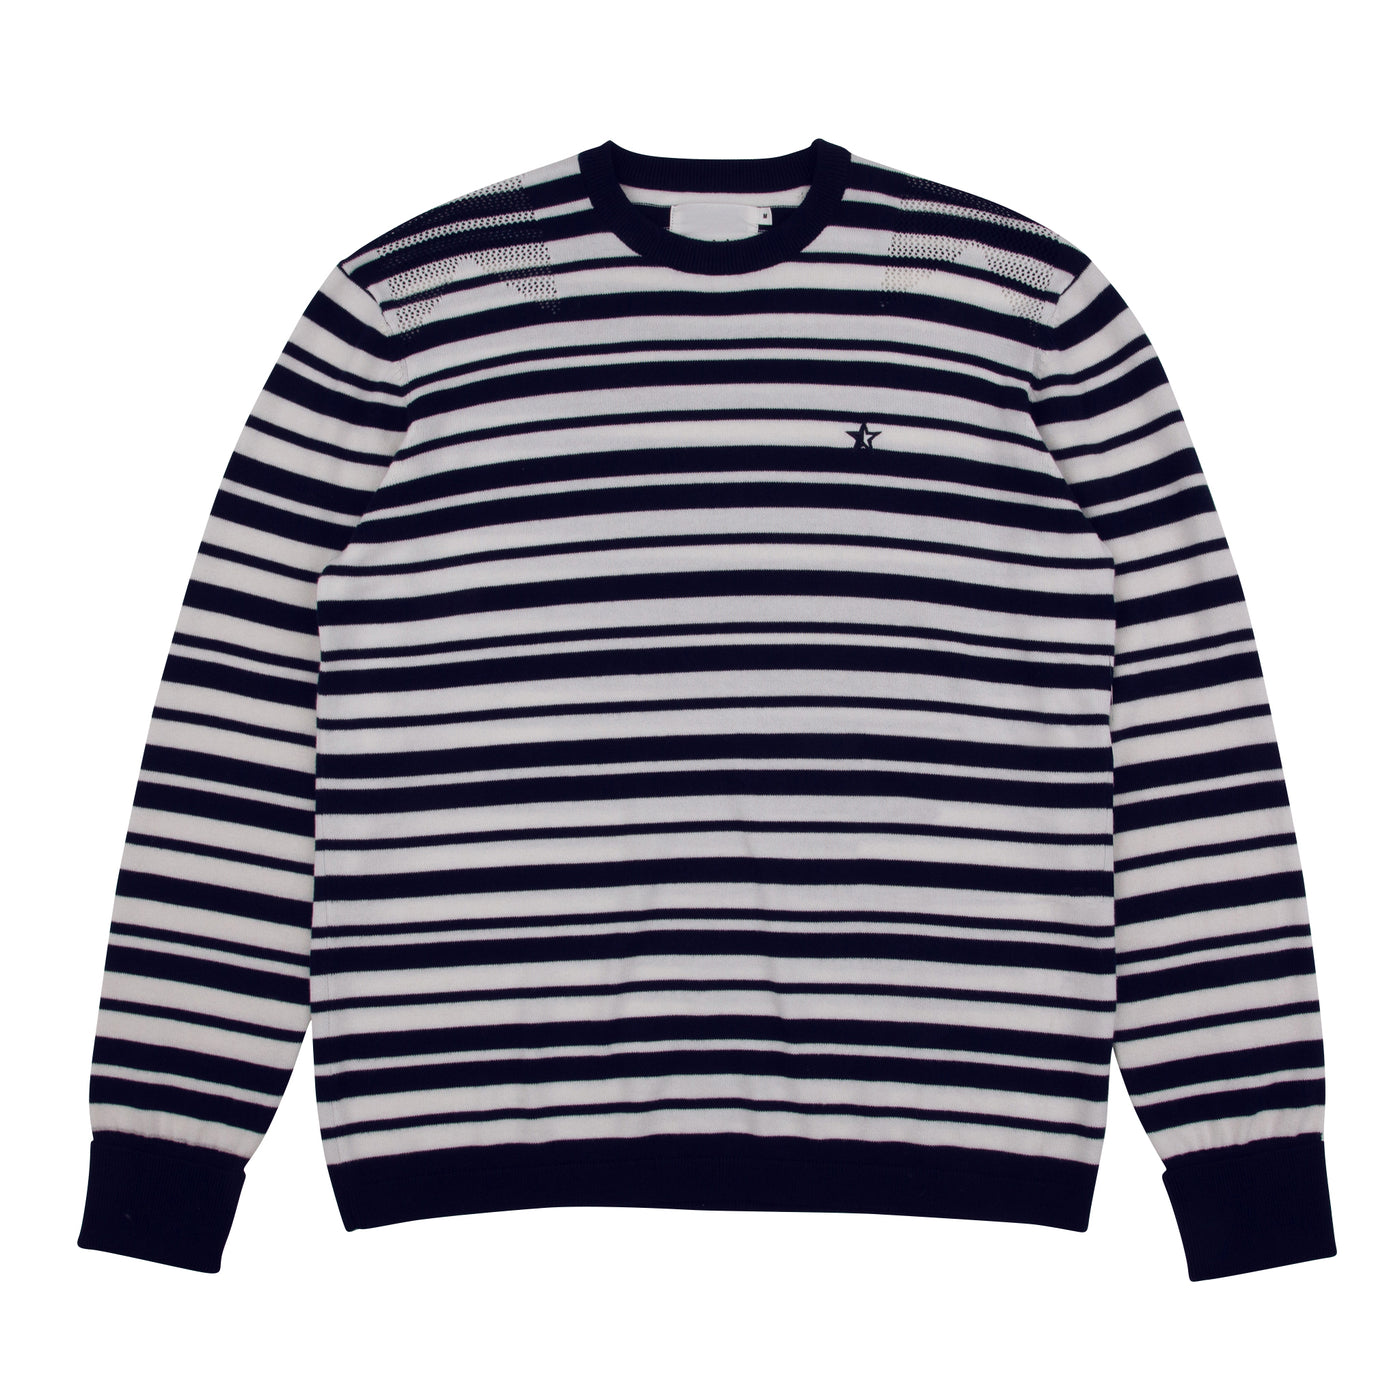 Cosmos Knit - Deep Navy and Off White Stripe